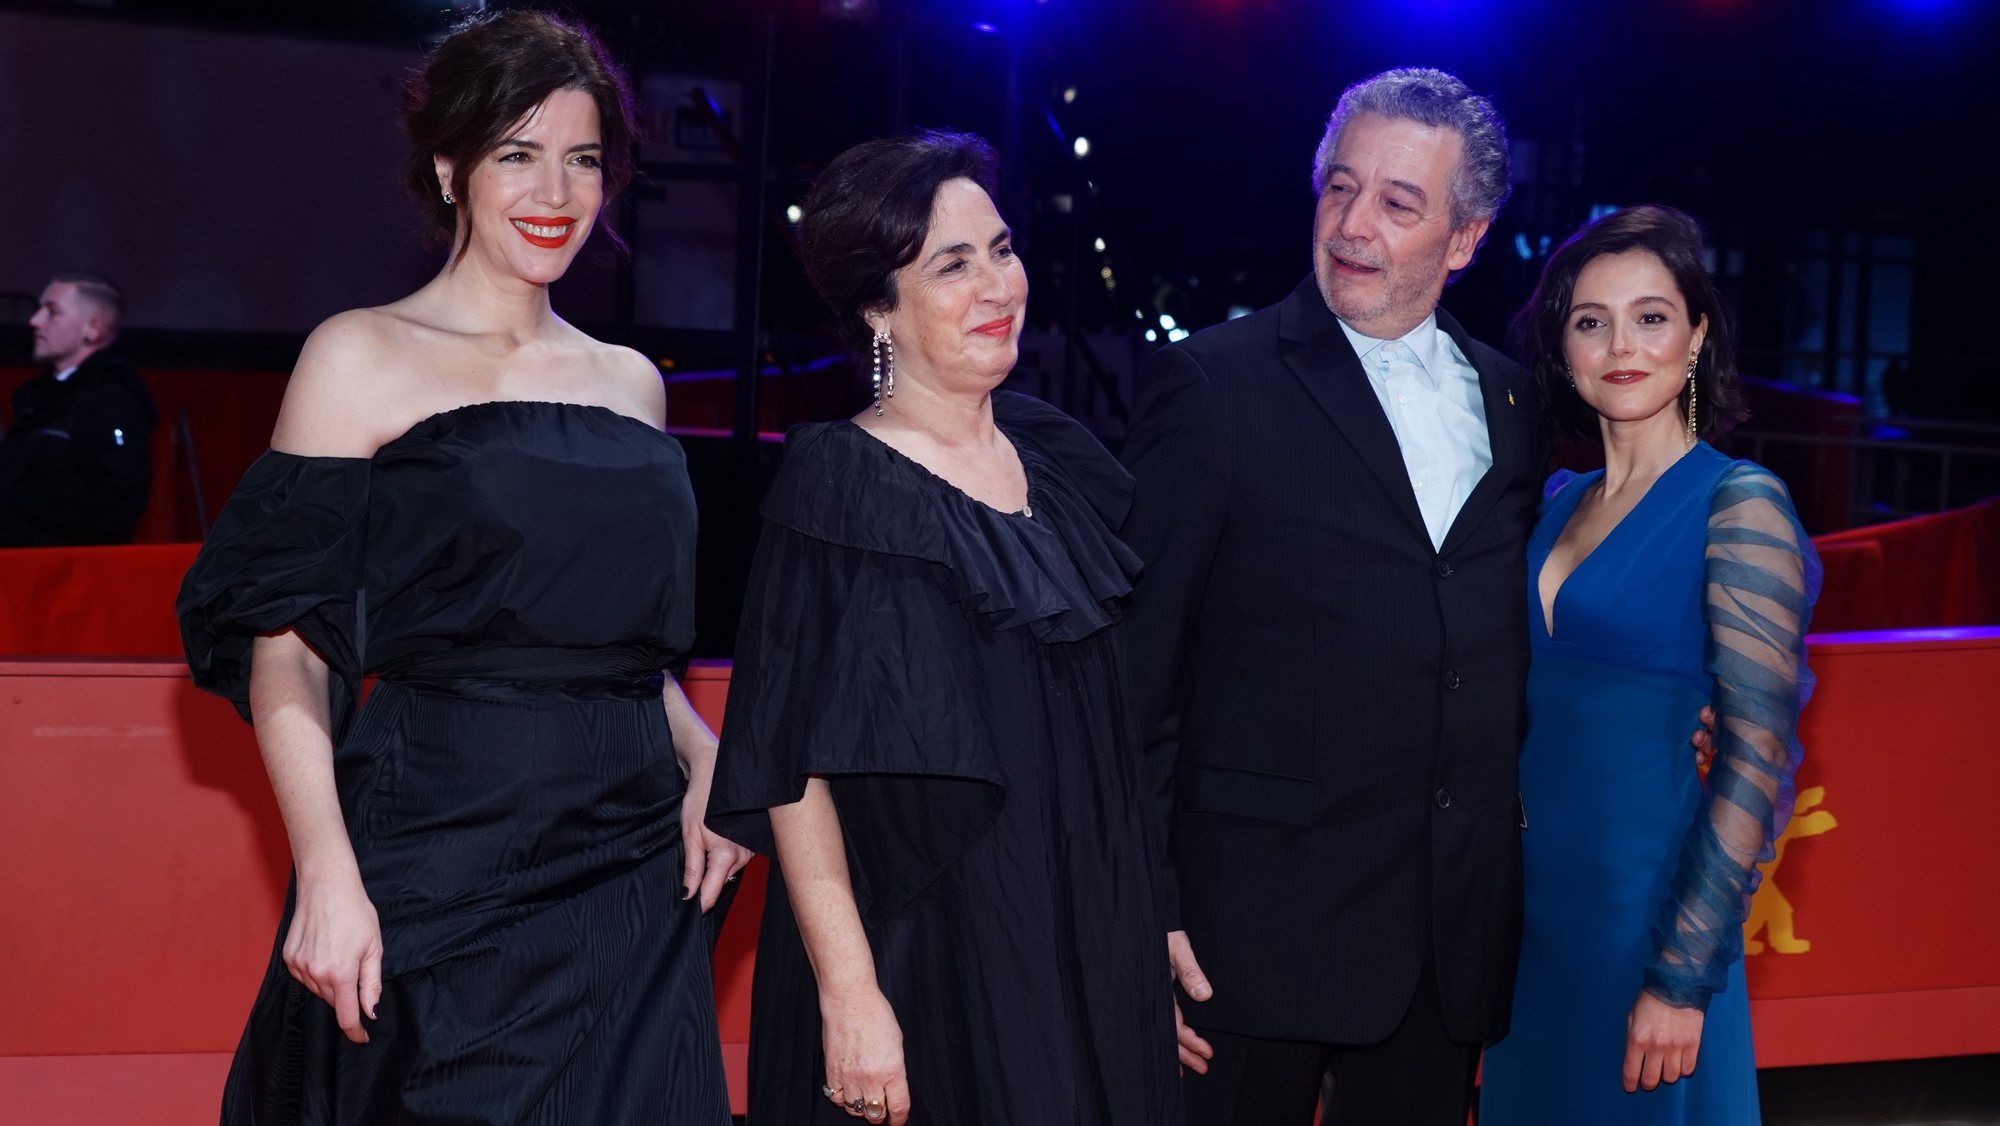 epa10484399 (L-R) Anabela Moreira, Rita Blanco, Joao Canijo, and Madalena Almeida arrive for the premiere of the movie &#039;Mal Viver&#039; (Bad Living) during the 73rd Berlin International Film Festival &#039;Berlinale&#039;, in Berlin, Germany, 22 February 2023. The in-person event runs from 16 to 26 February 2023.  EPA/CLEMENS BILAN